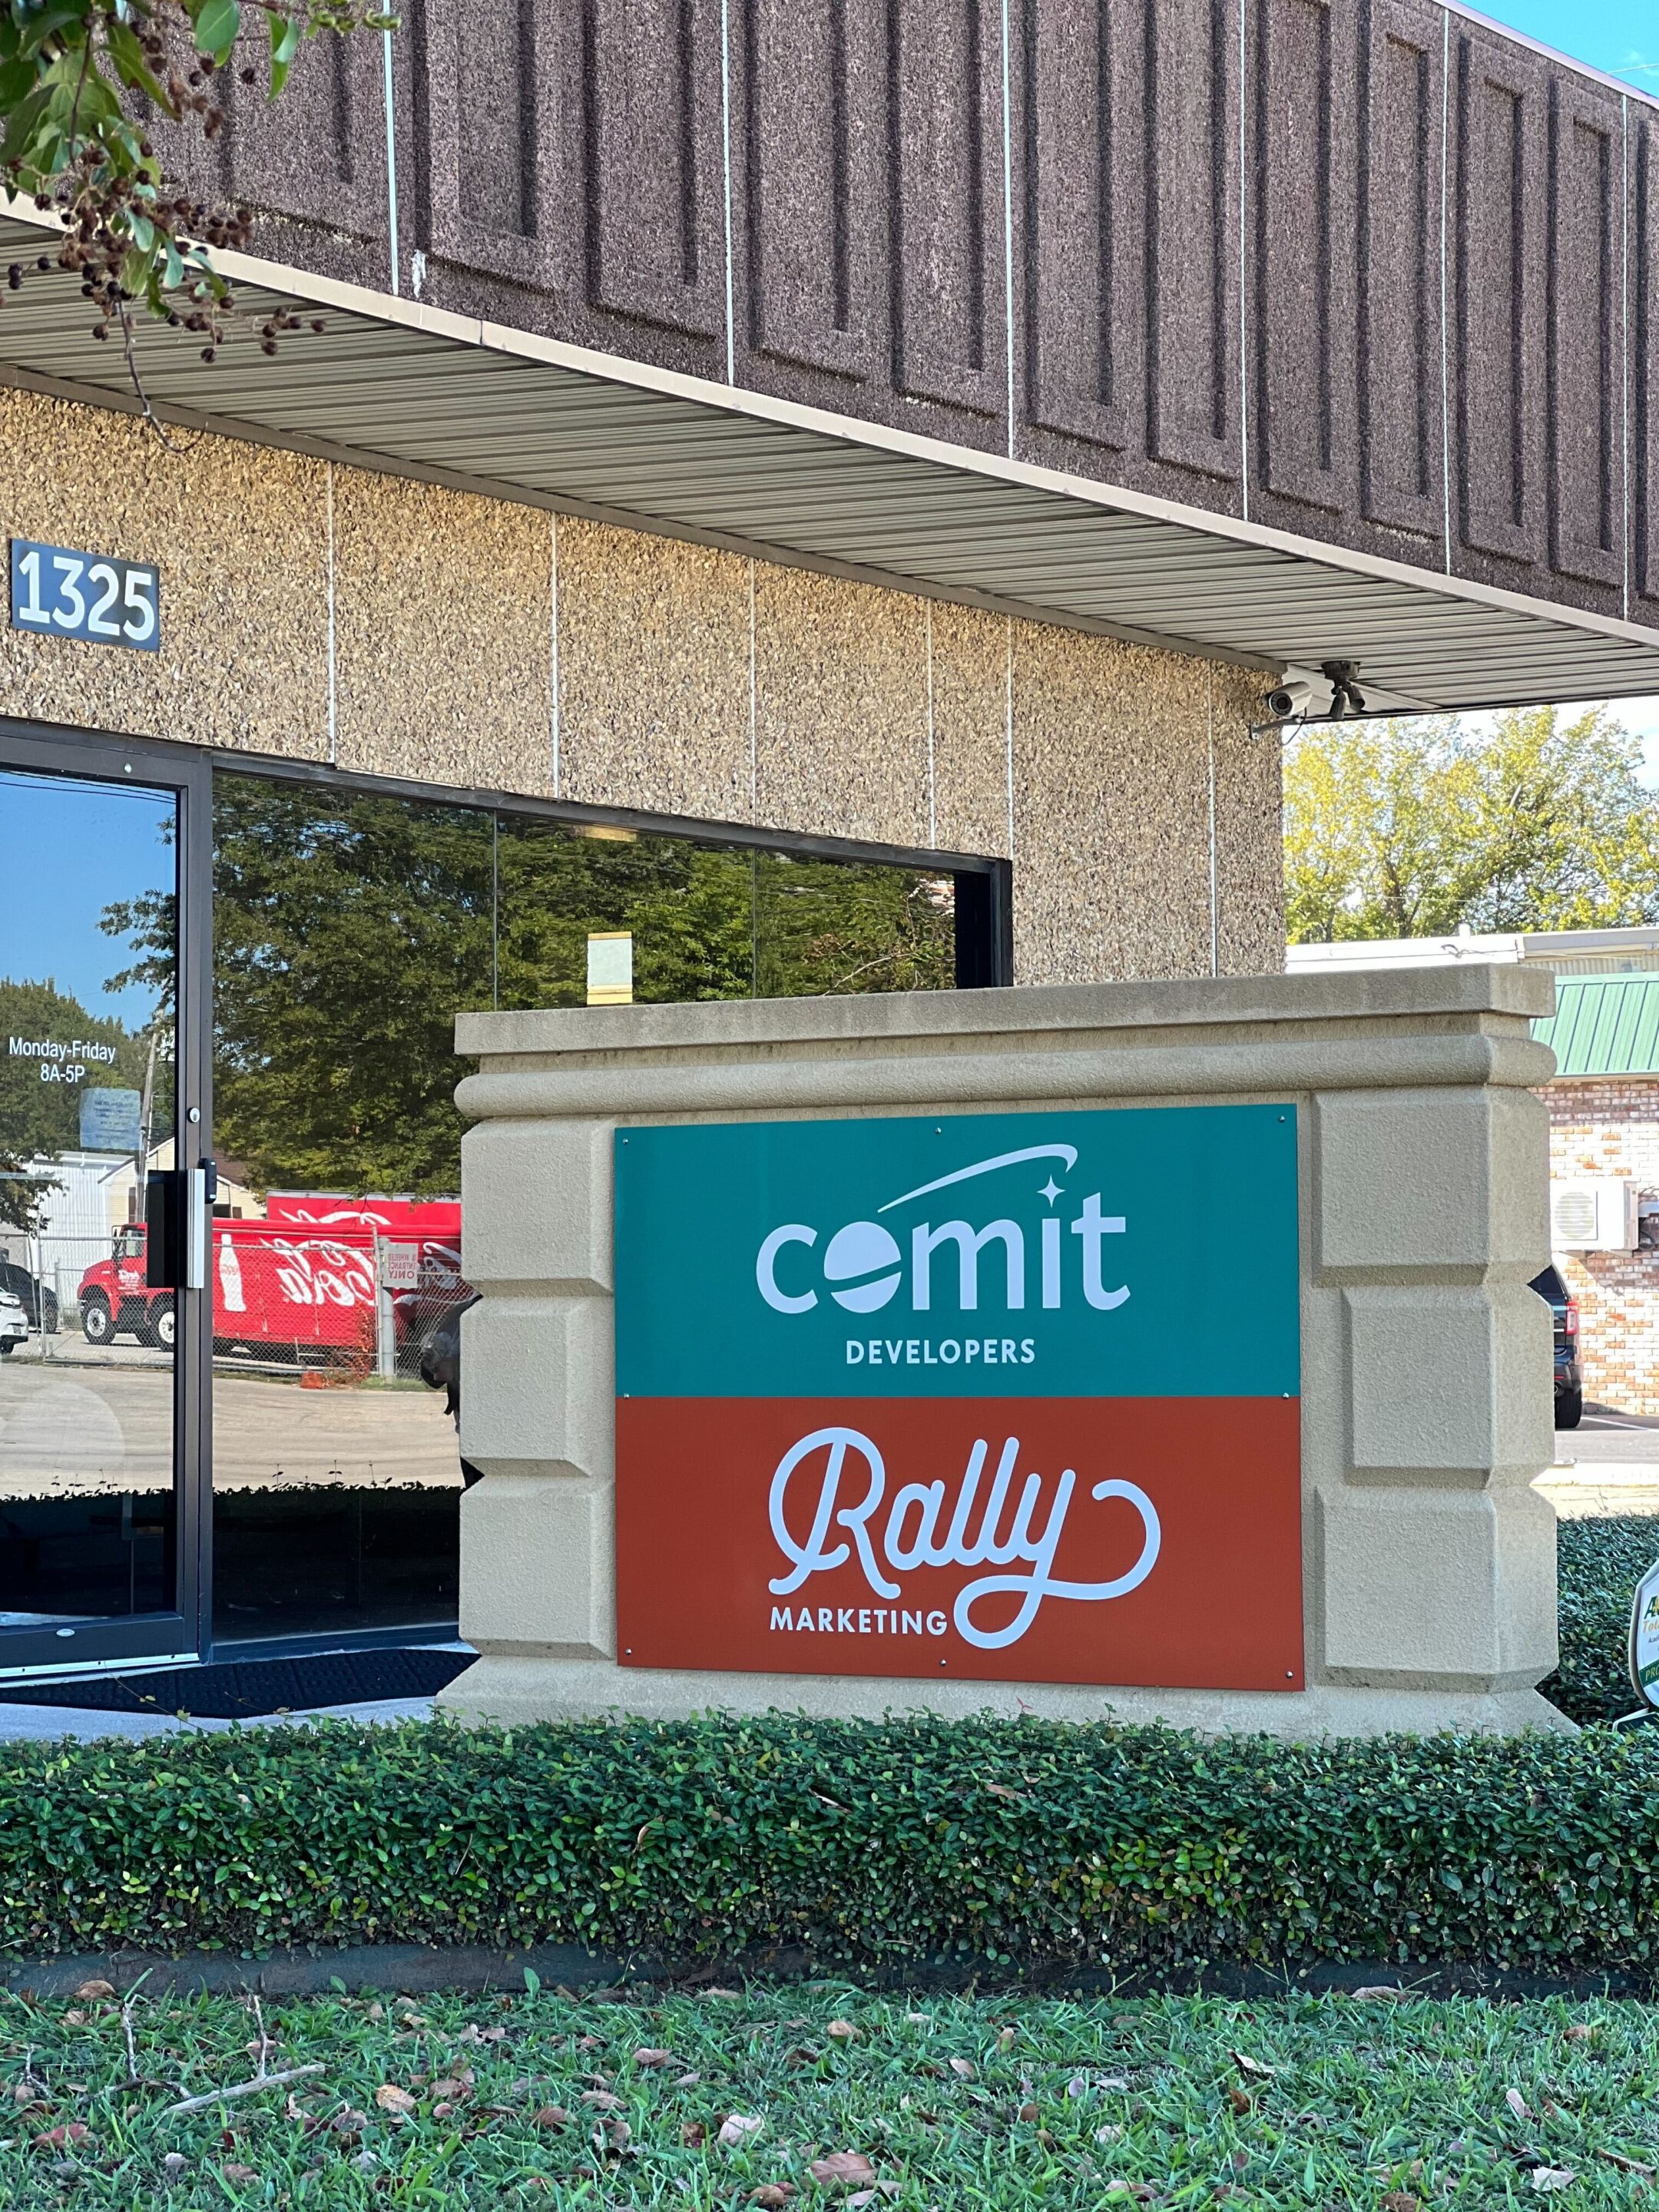 A picture showing the front of the Comit Developers and Rally Marketing office on 1325 Eraste Landry Road in Lafayette, Louisiana.